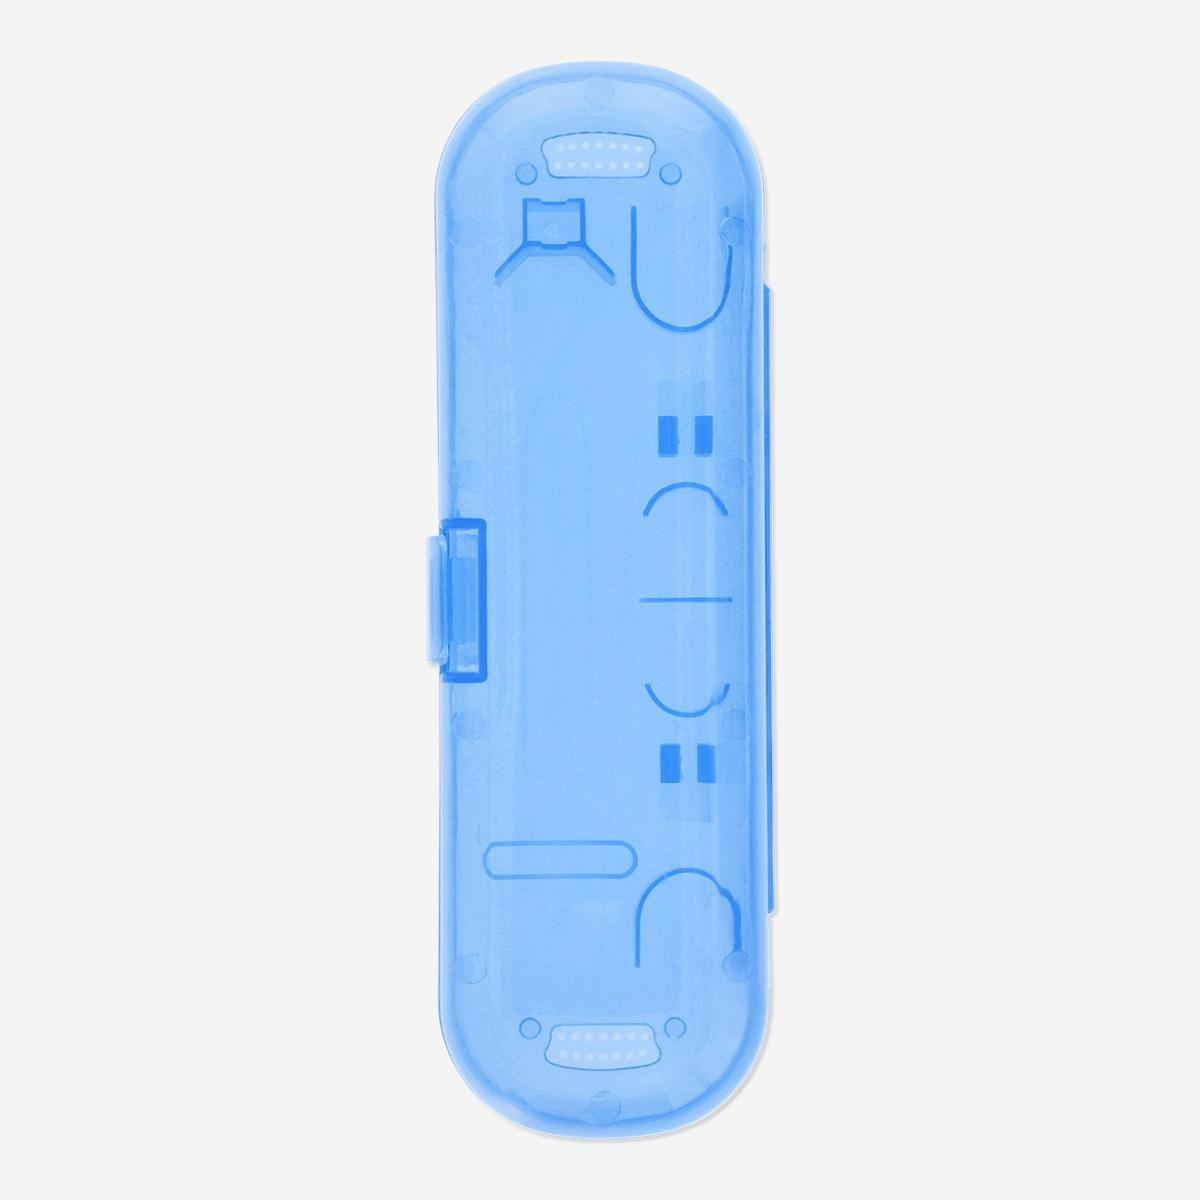 Blue electric toothbrush travel case